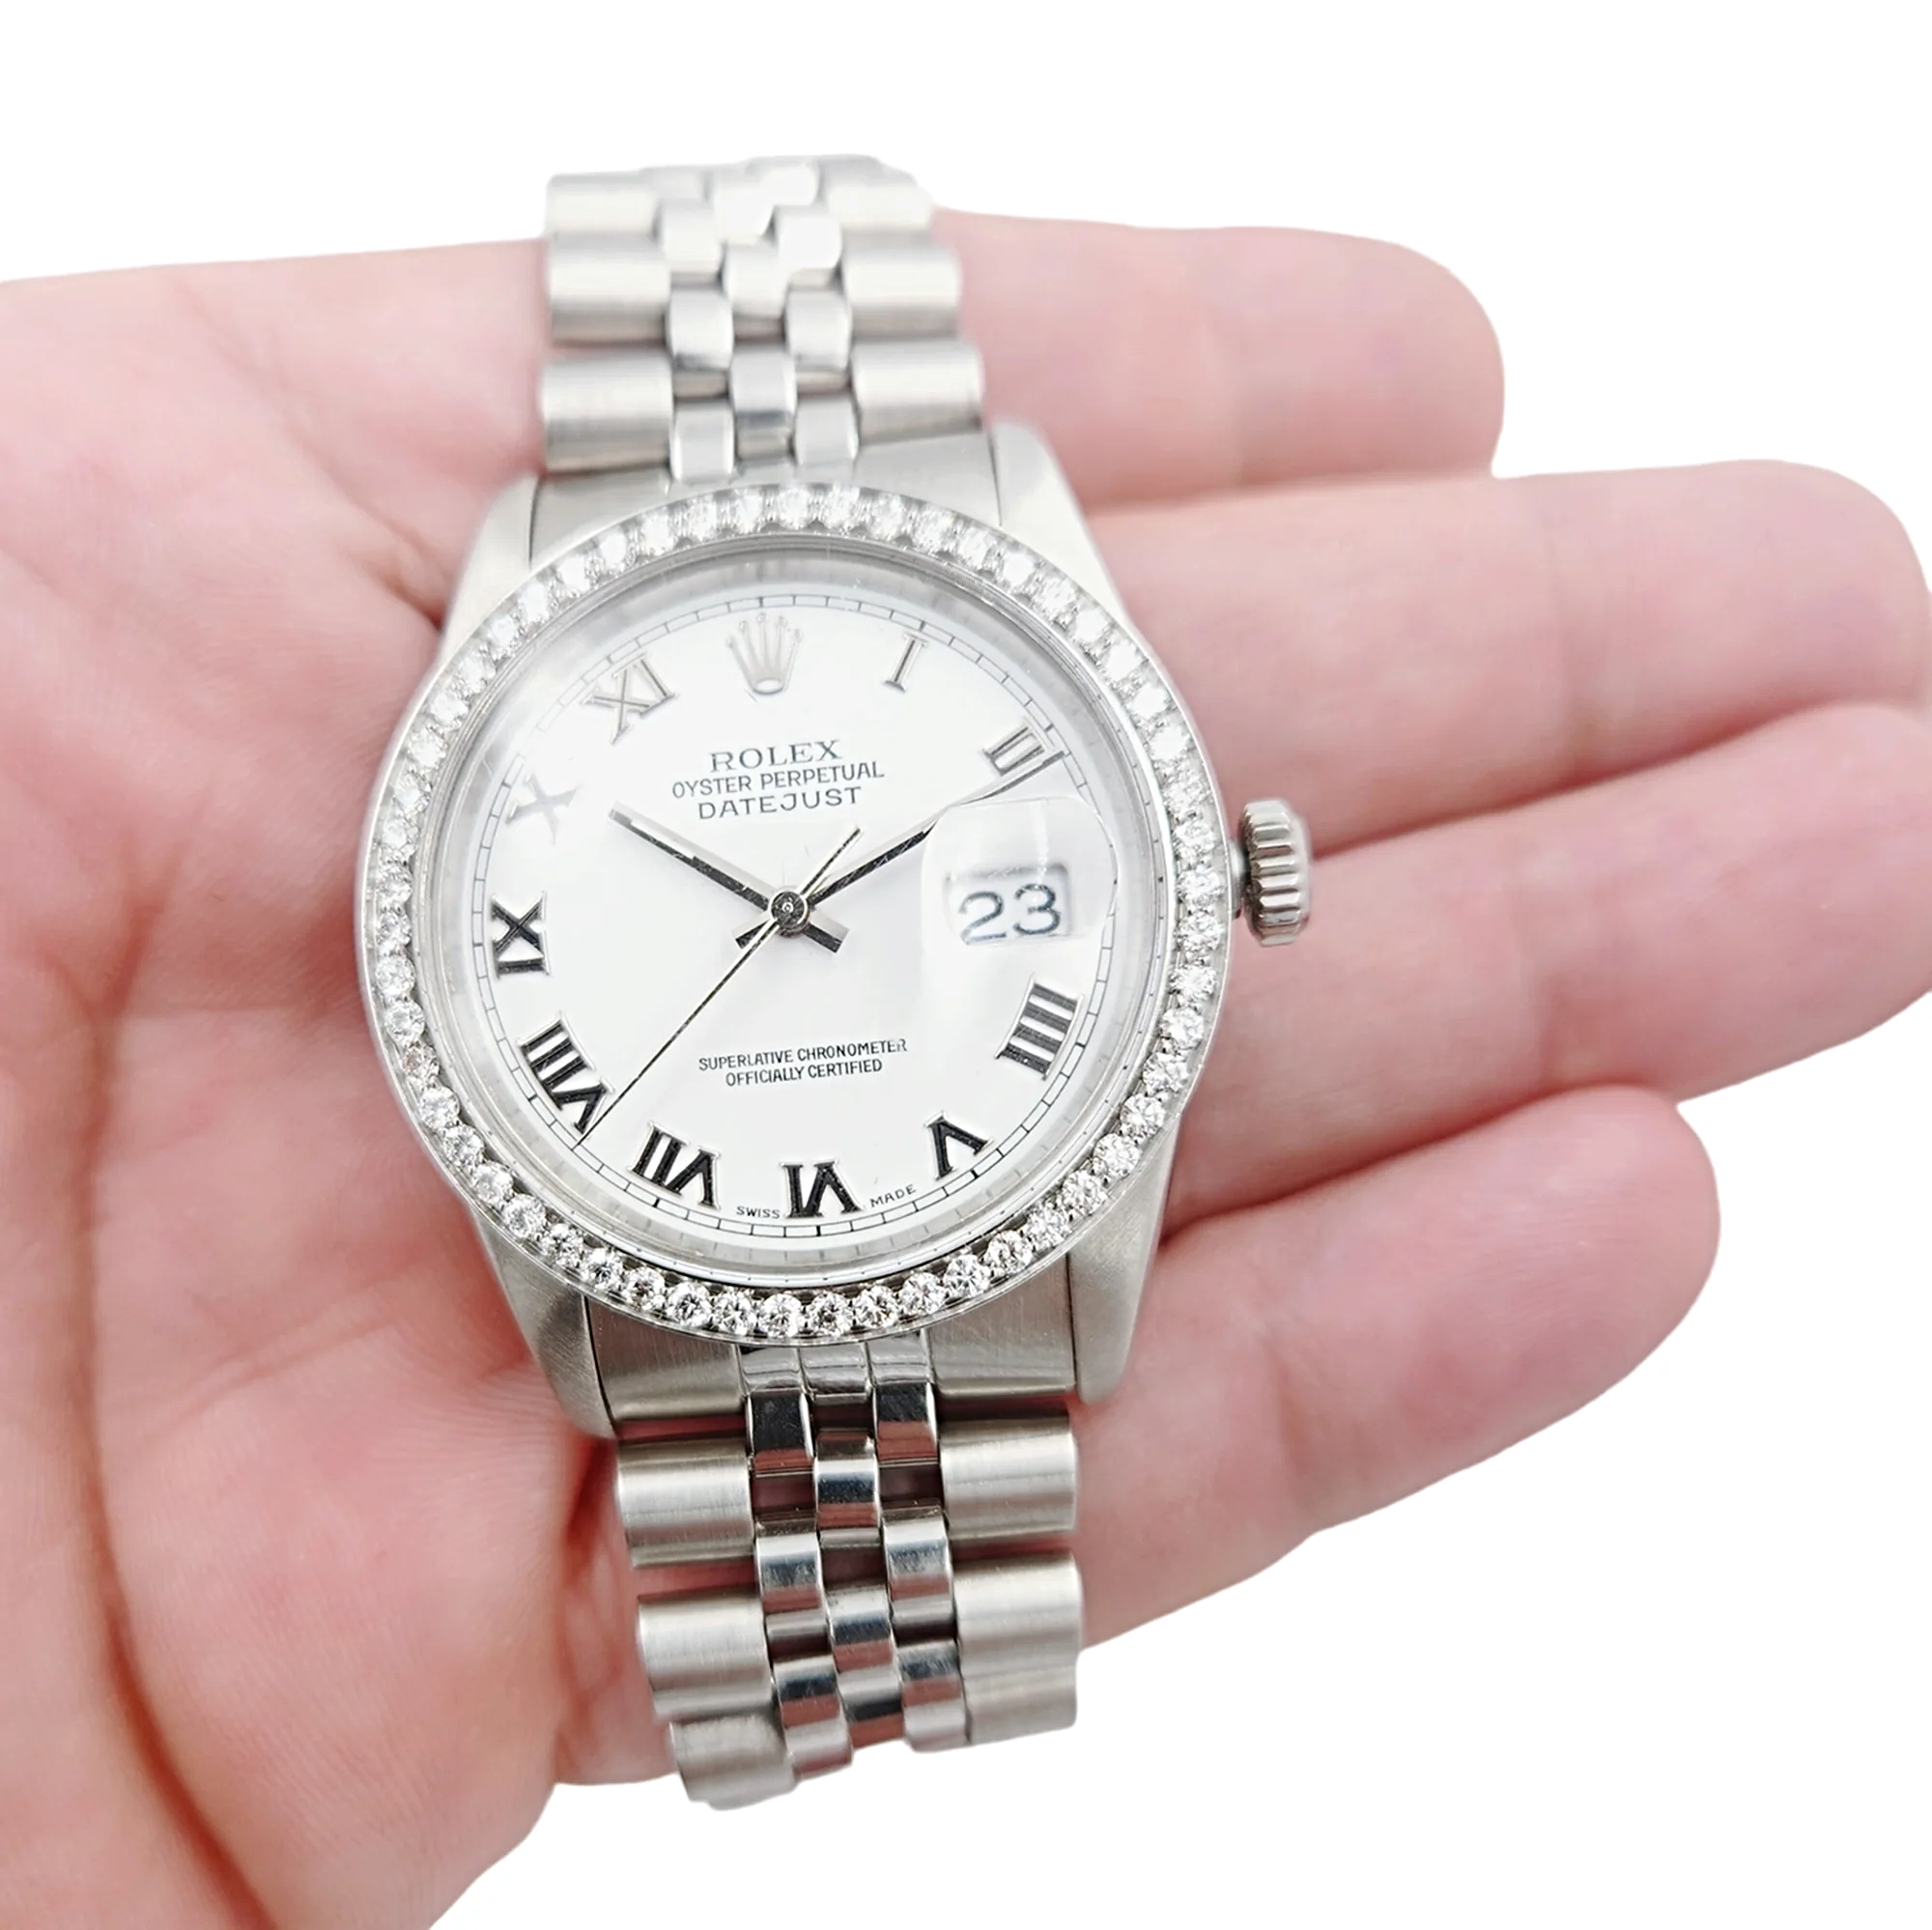 Men's Rolex 36mm DateJust Stainless Steel Watch with White Dial and Diamond Bezel. (Pre-Owned 16220)